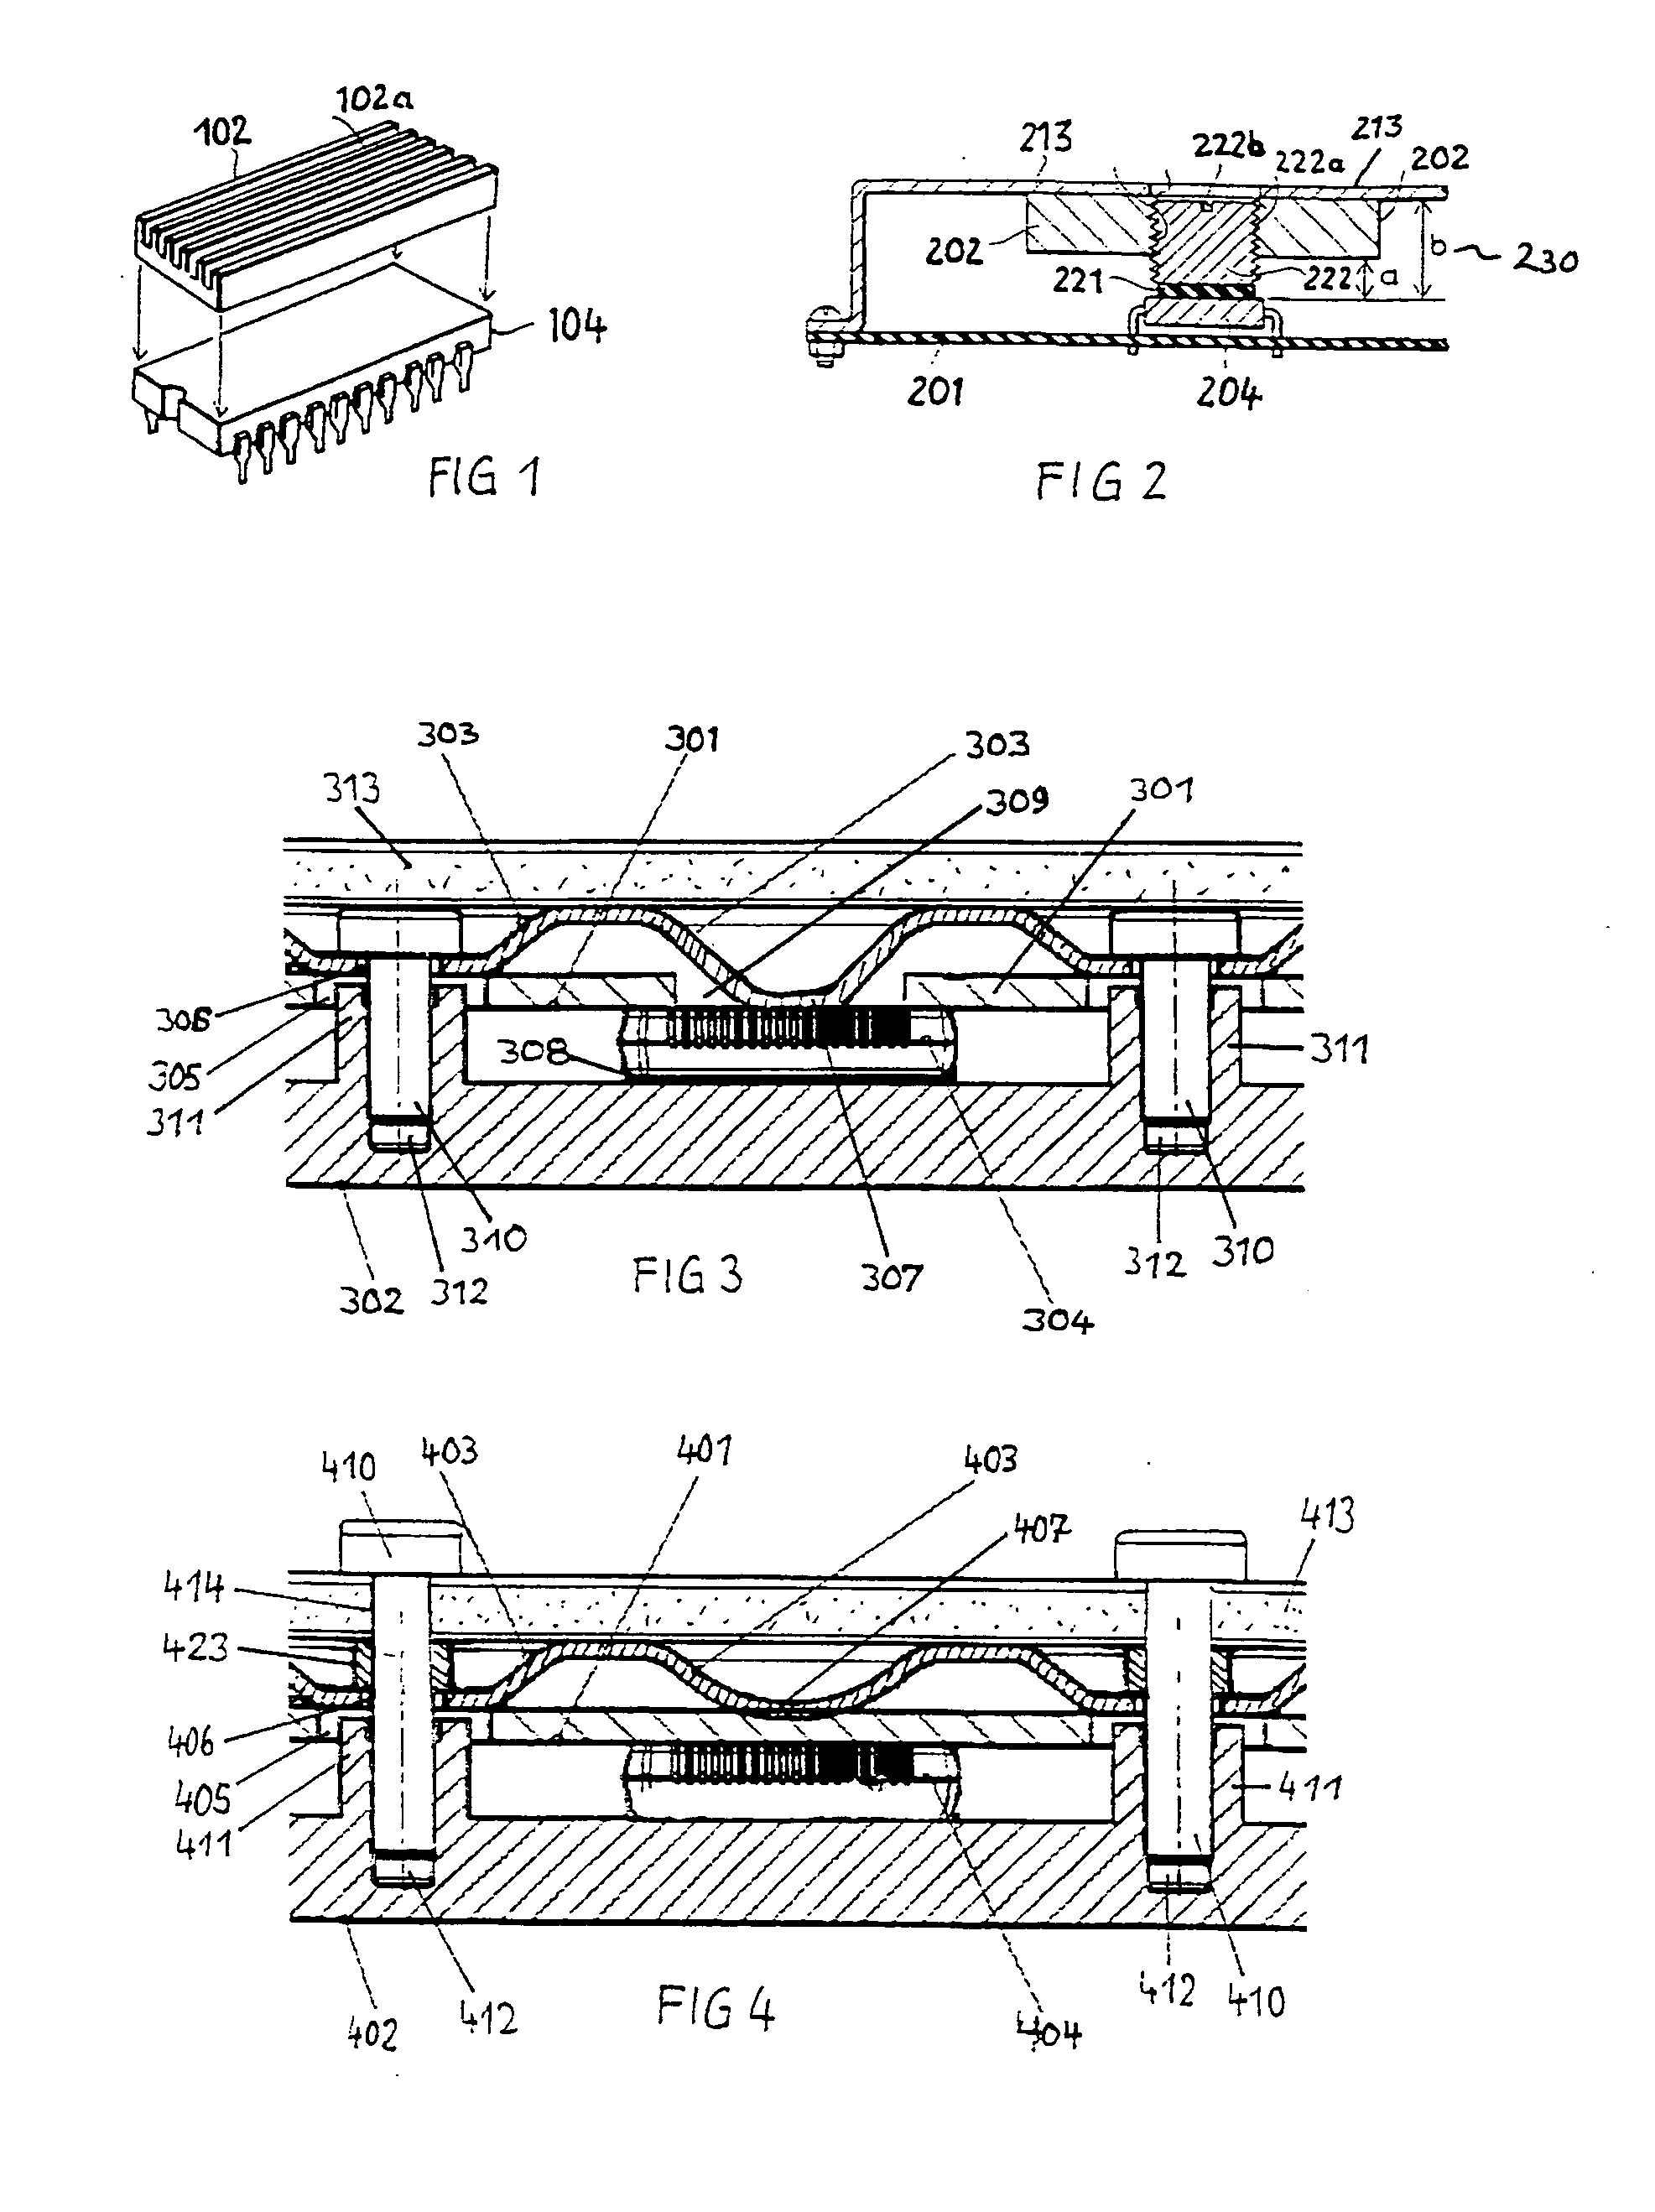 Apparatus for cooling semiconductor devices attached to a printed circuit board